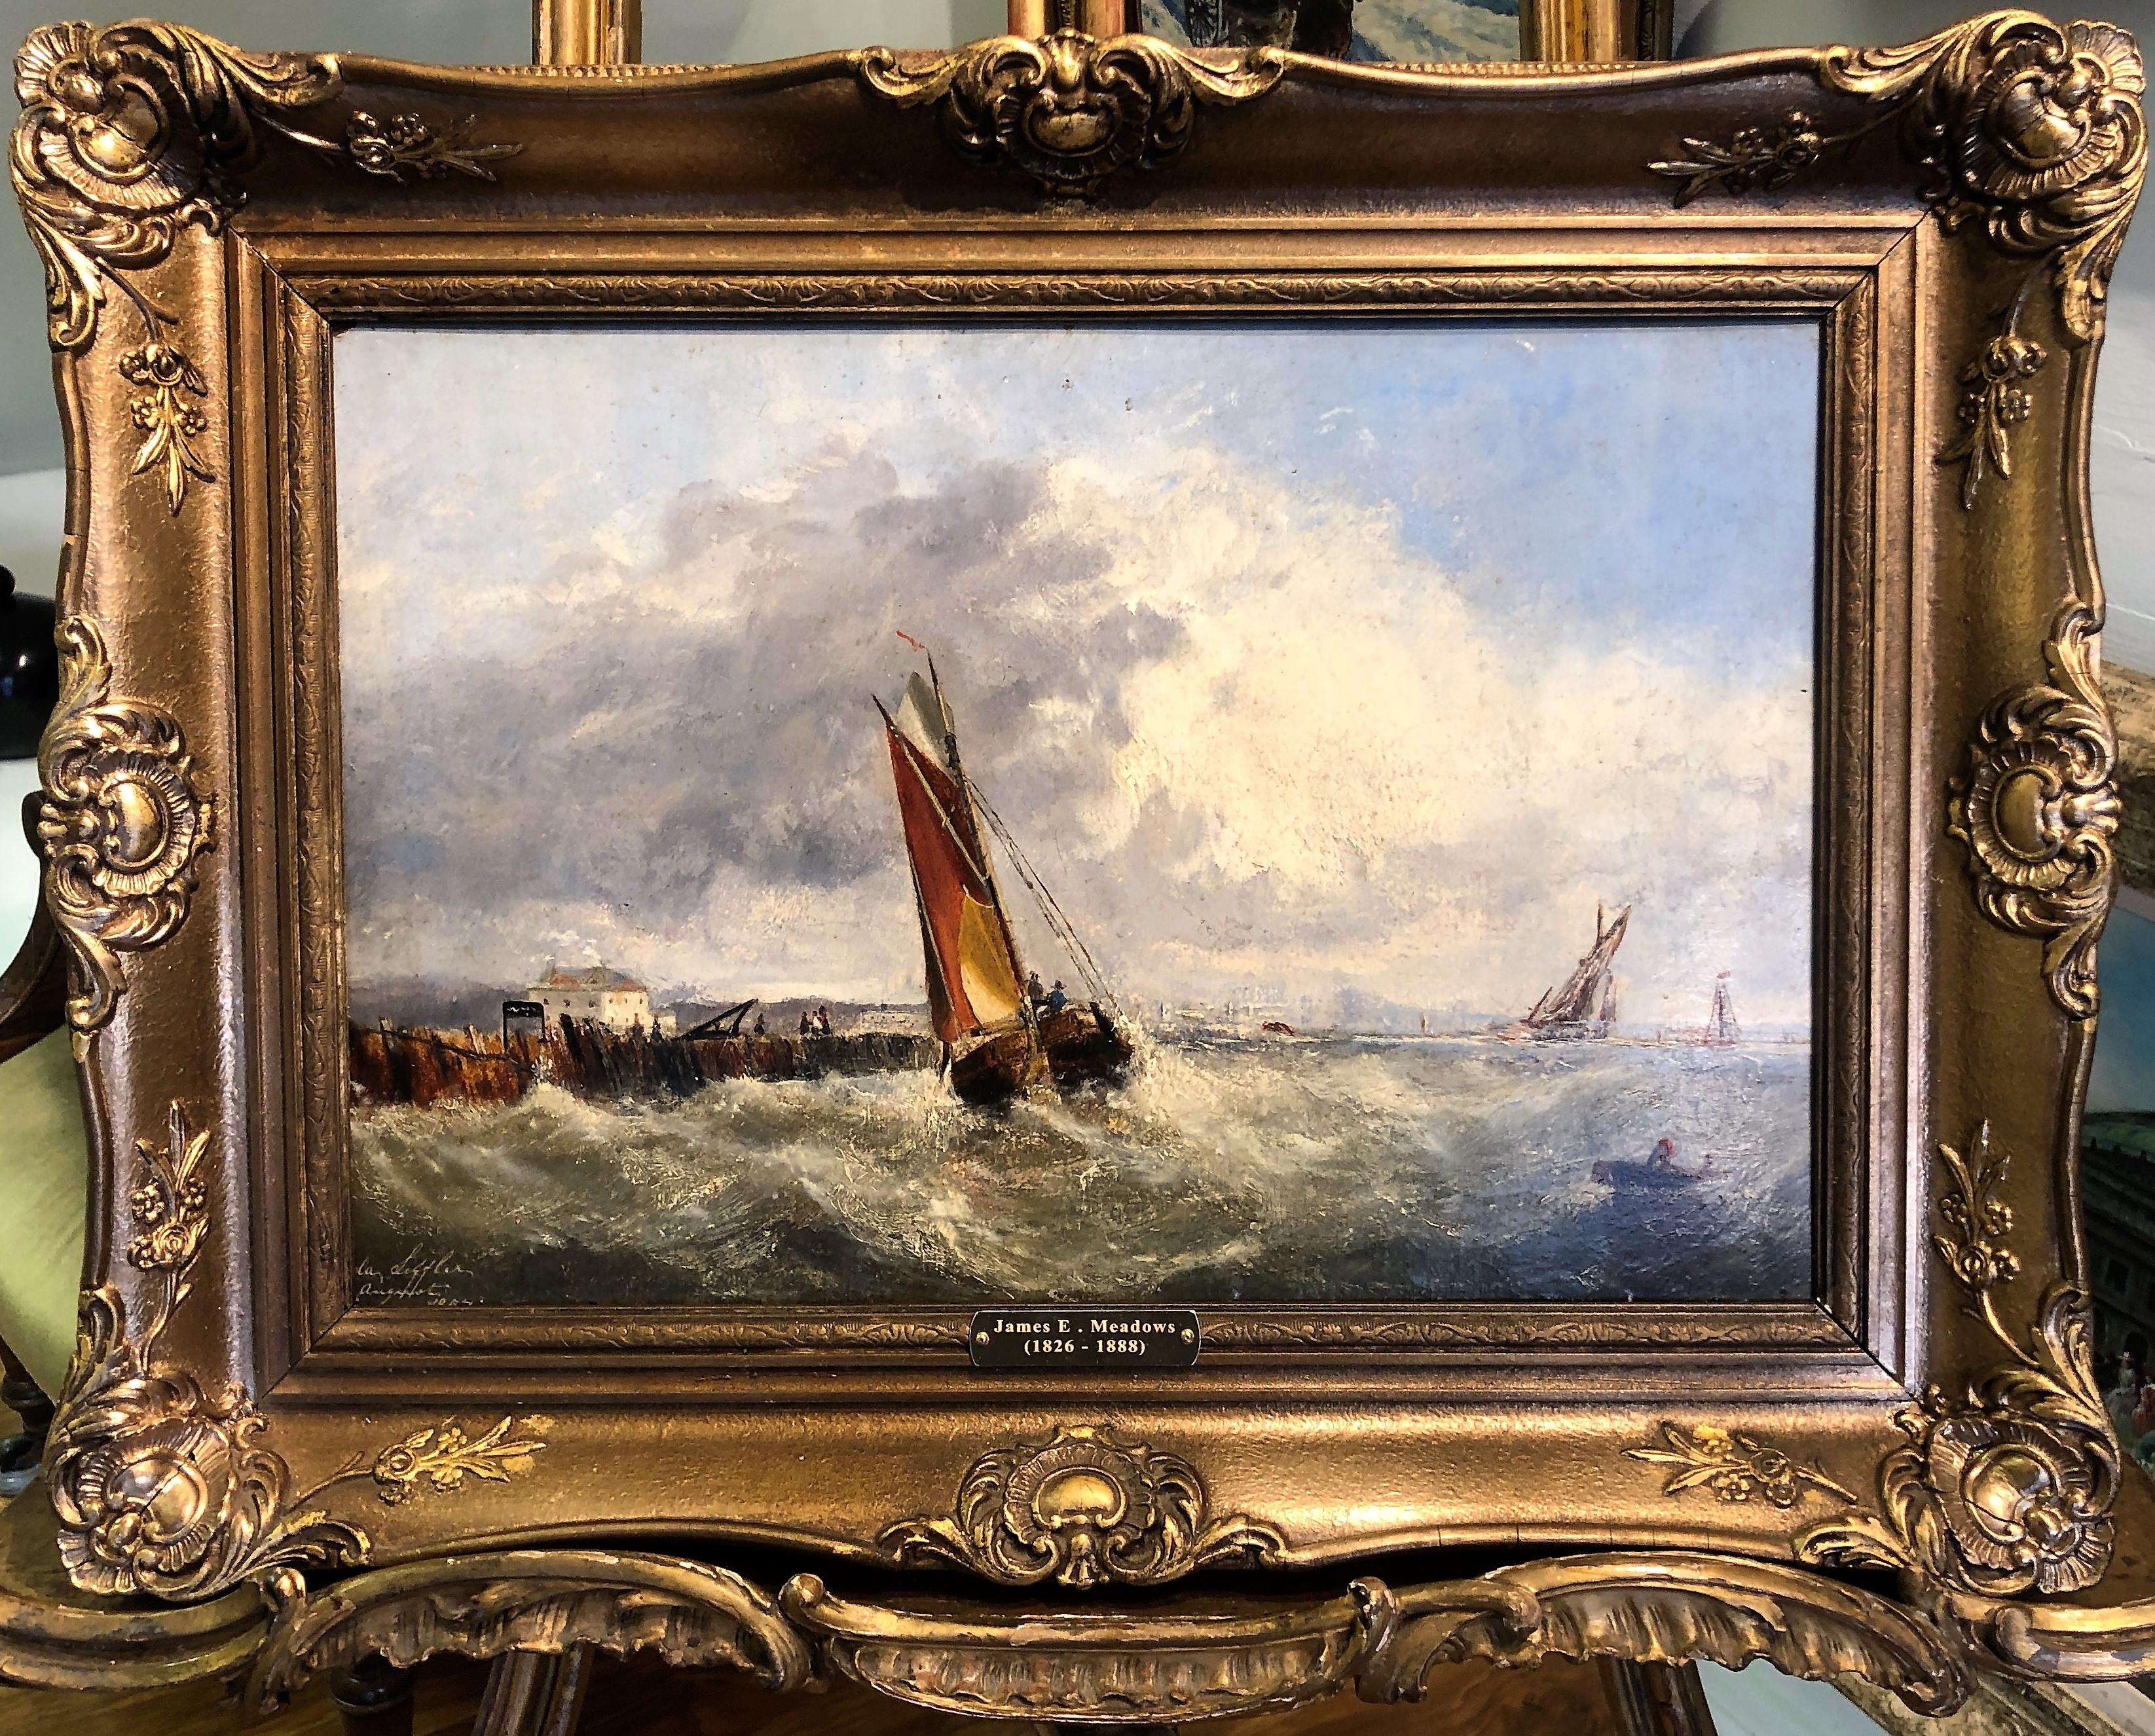 OLD MASTER OIL PAINTING High Quality 19th CENTURY SturY Stormy Seas Gold vergoldeter Rahmen – Painting von James Edward Meadows